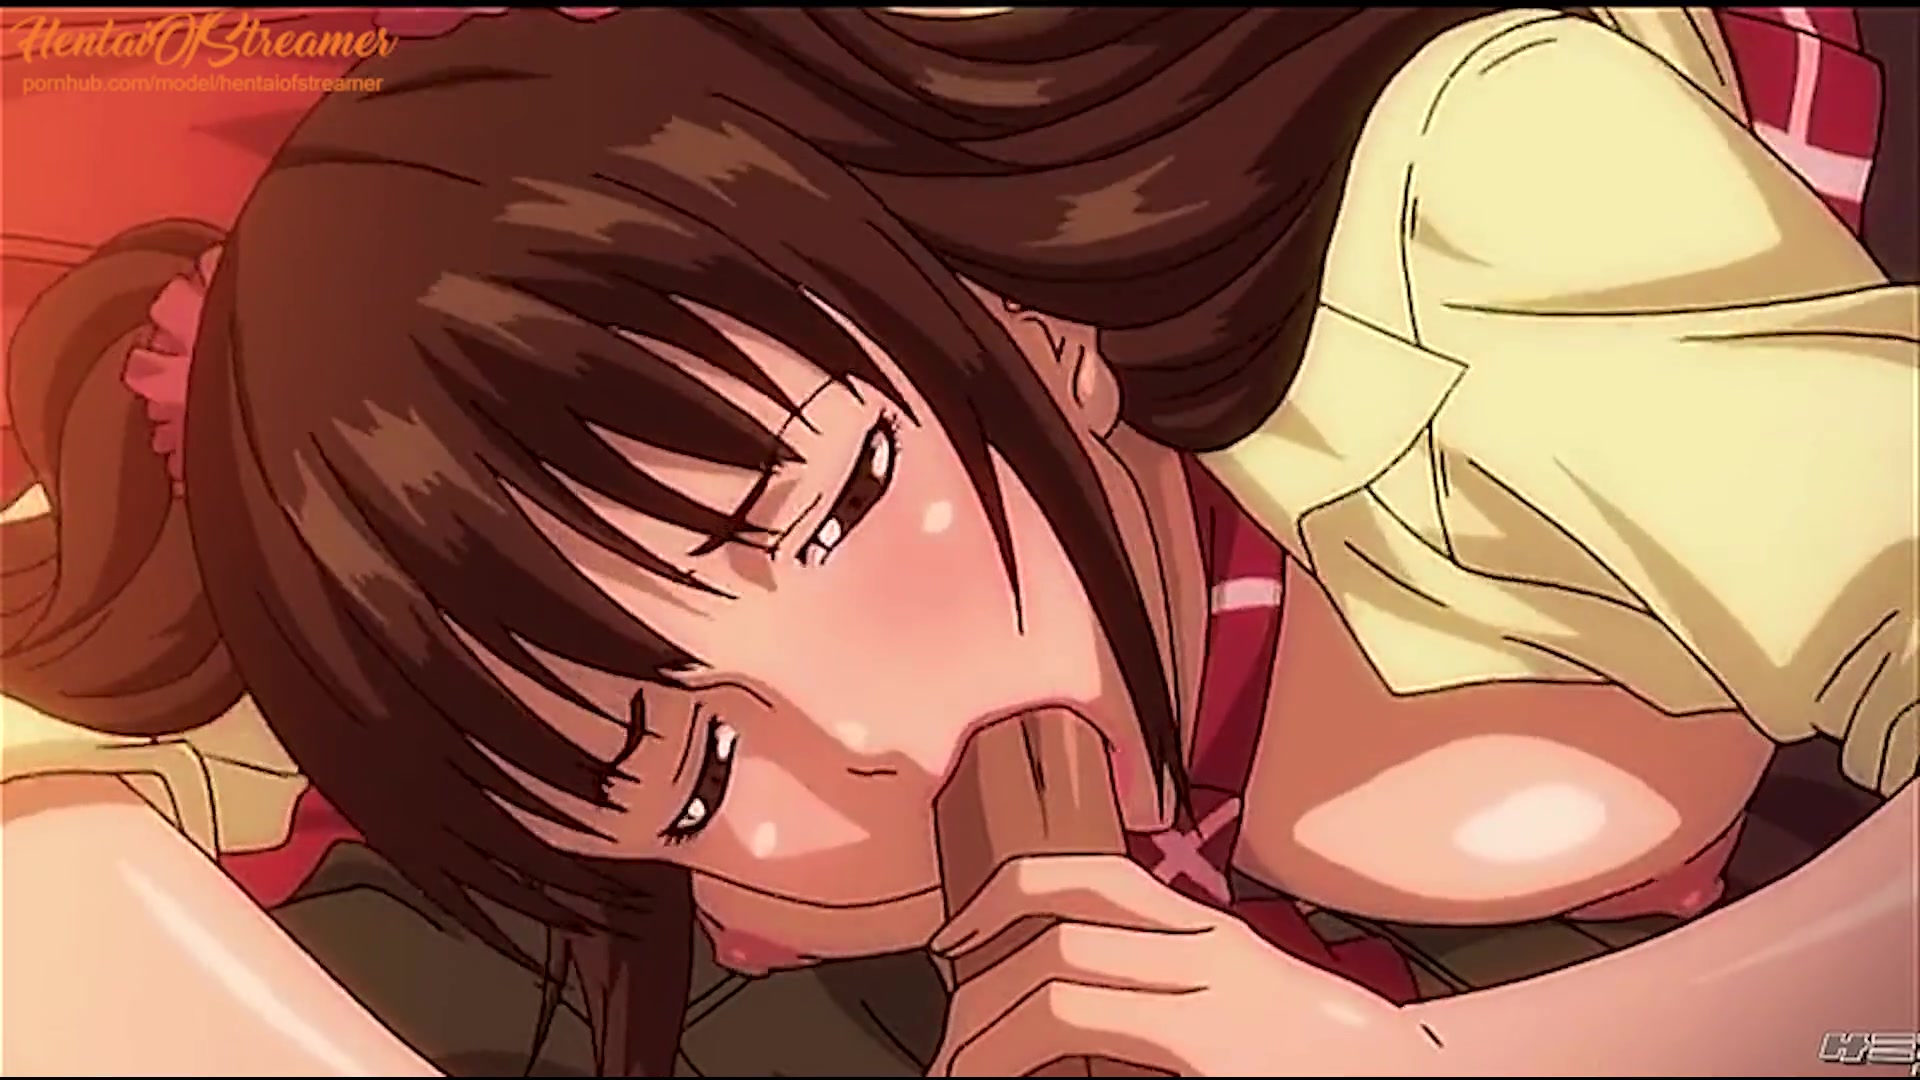 Deepthroat Anime - Anime Porn Uncensored | Hotwife Dude Sees his Gf Plumb and Deep-Throat off  another Stud | Anime Porn, Anime - uiPorn.com